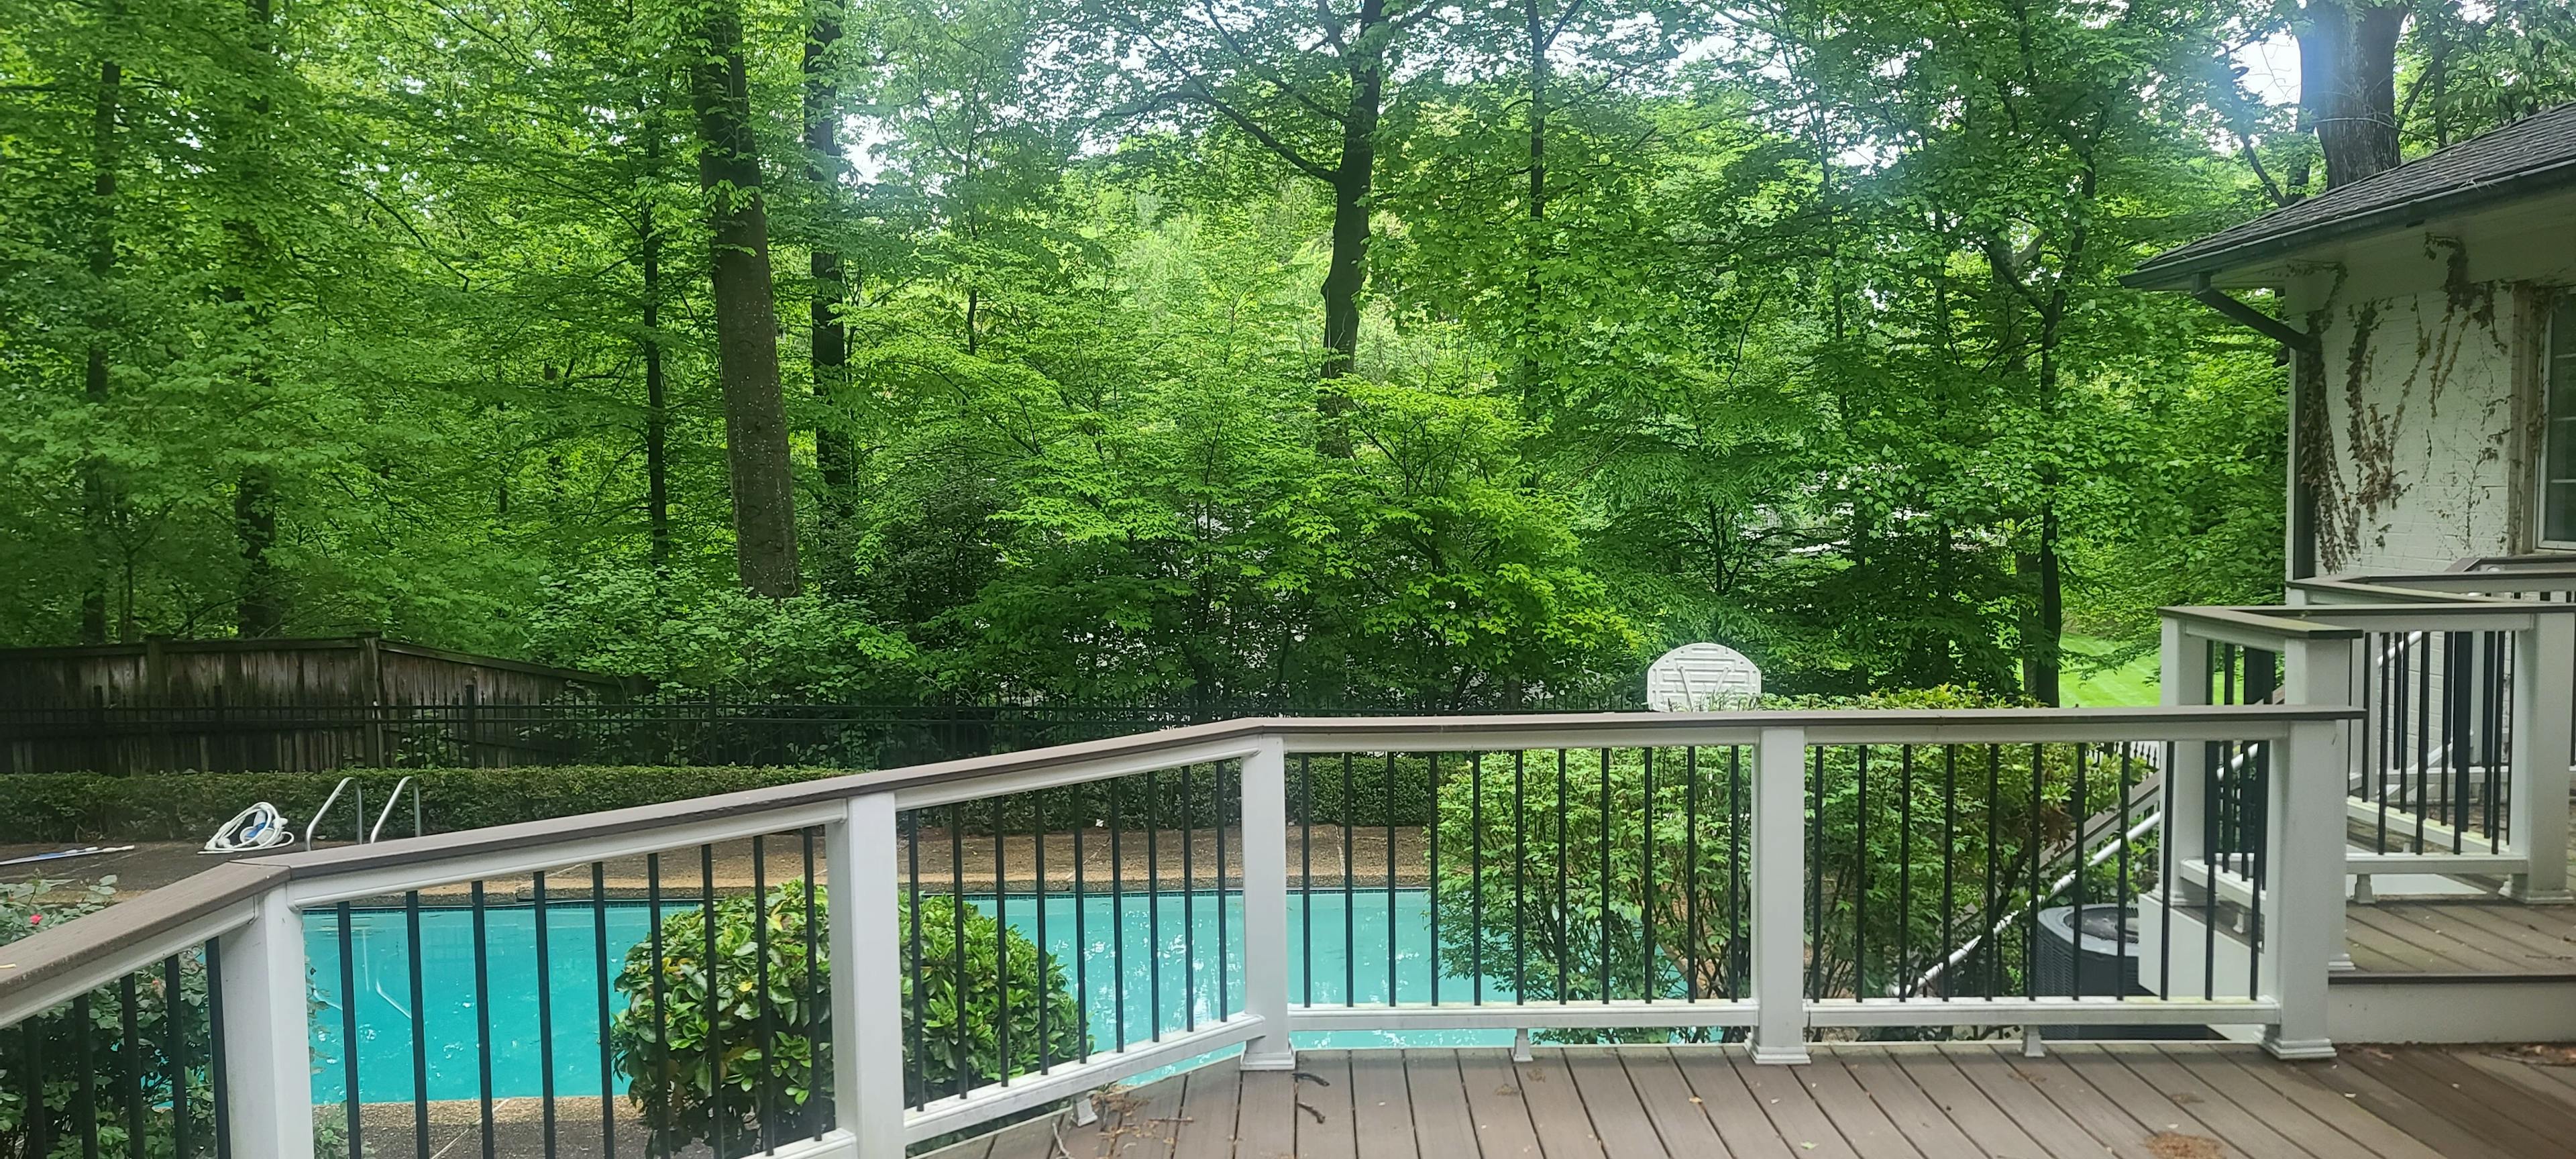 Outdoor deck and swimming pool